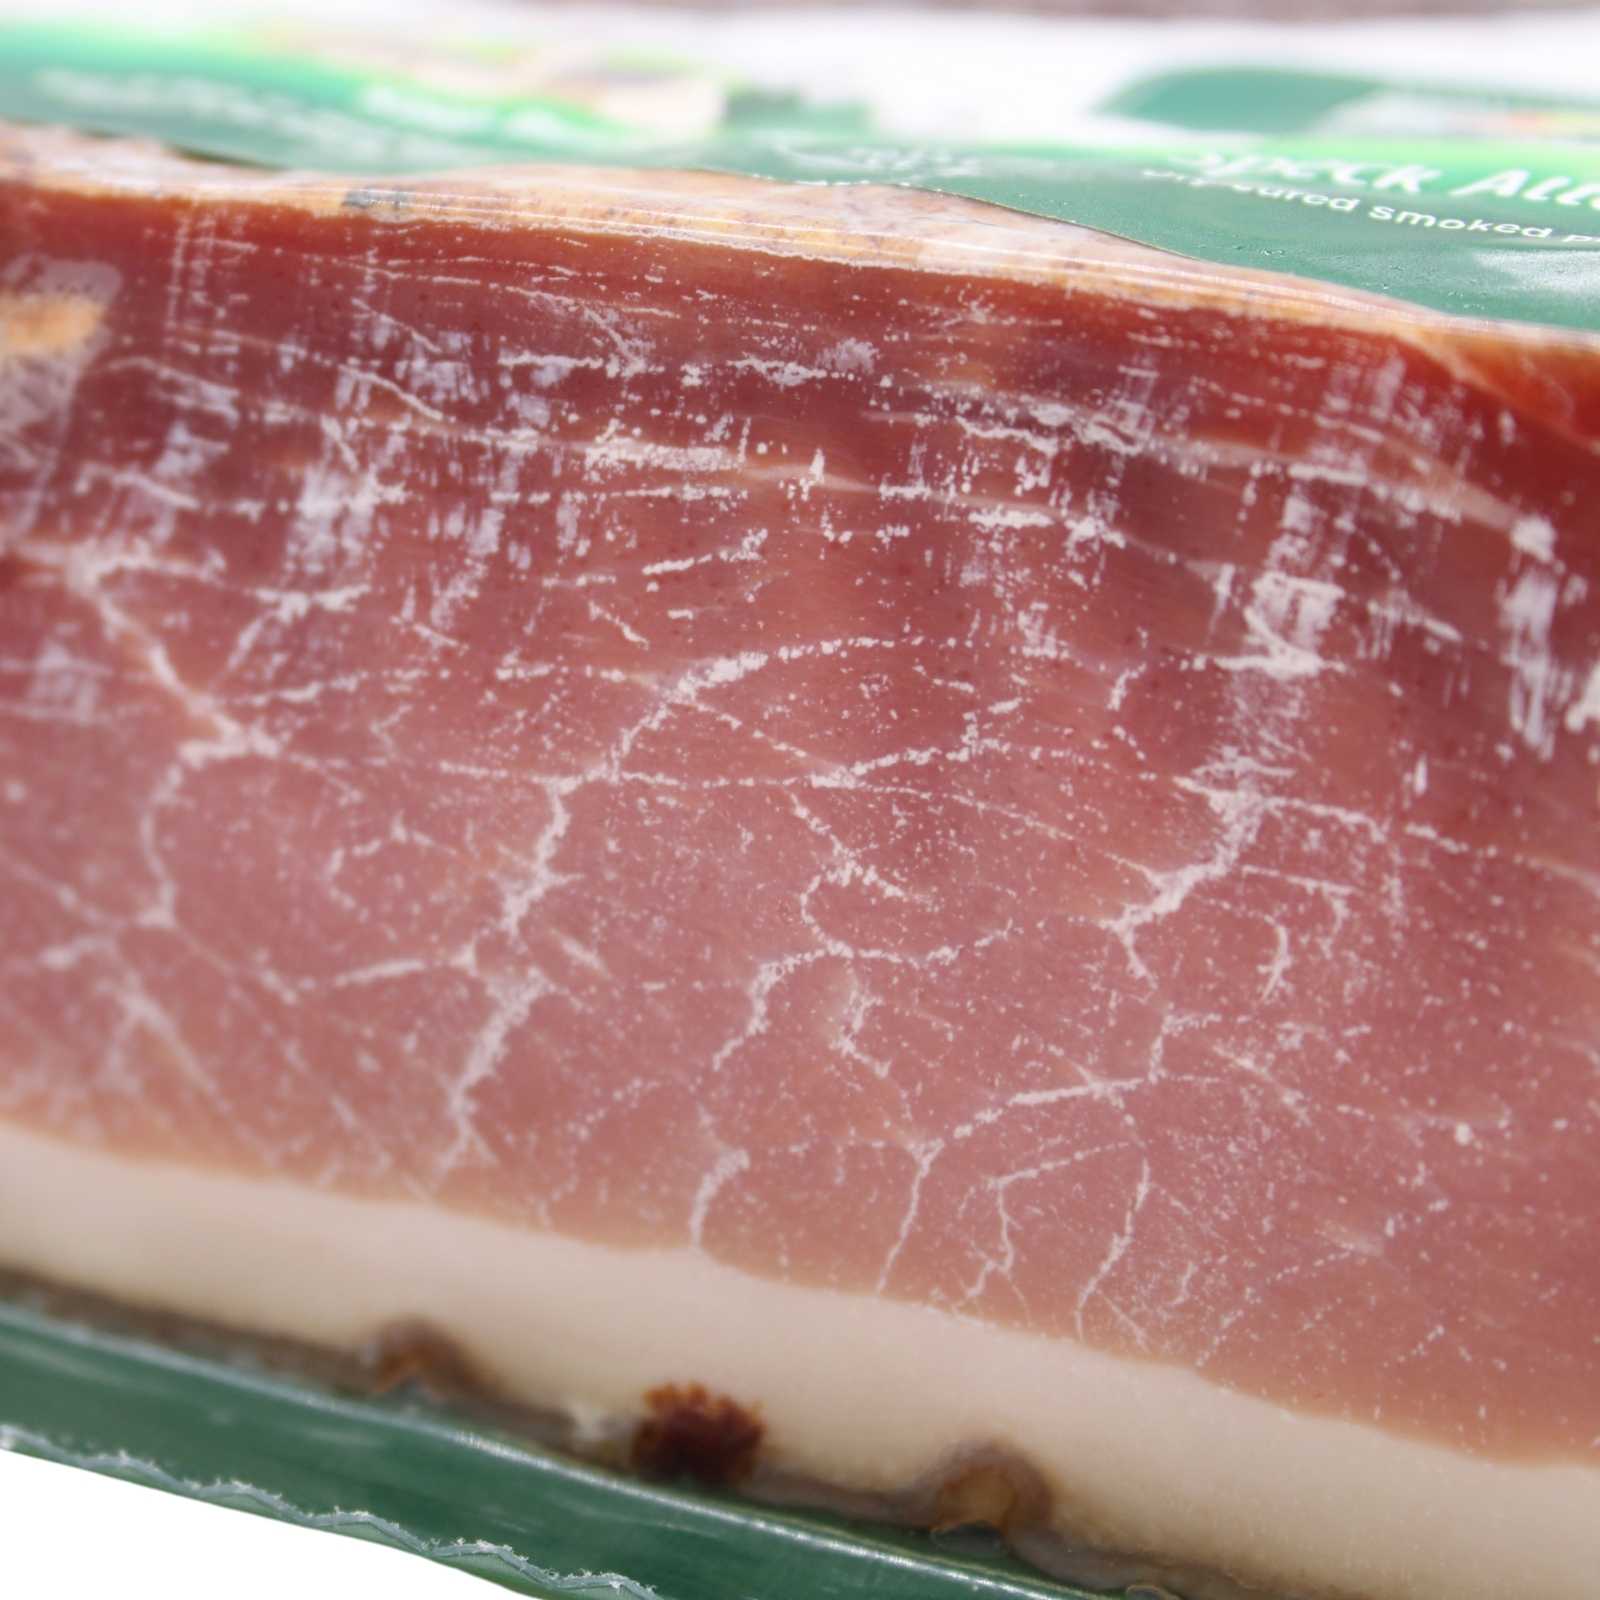 SPECK | Smoked Cured Ham - Prosciutto | Weight approx. 5 lbs | by Moser brand up close